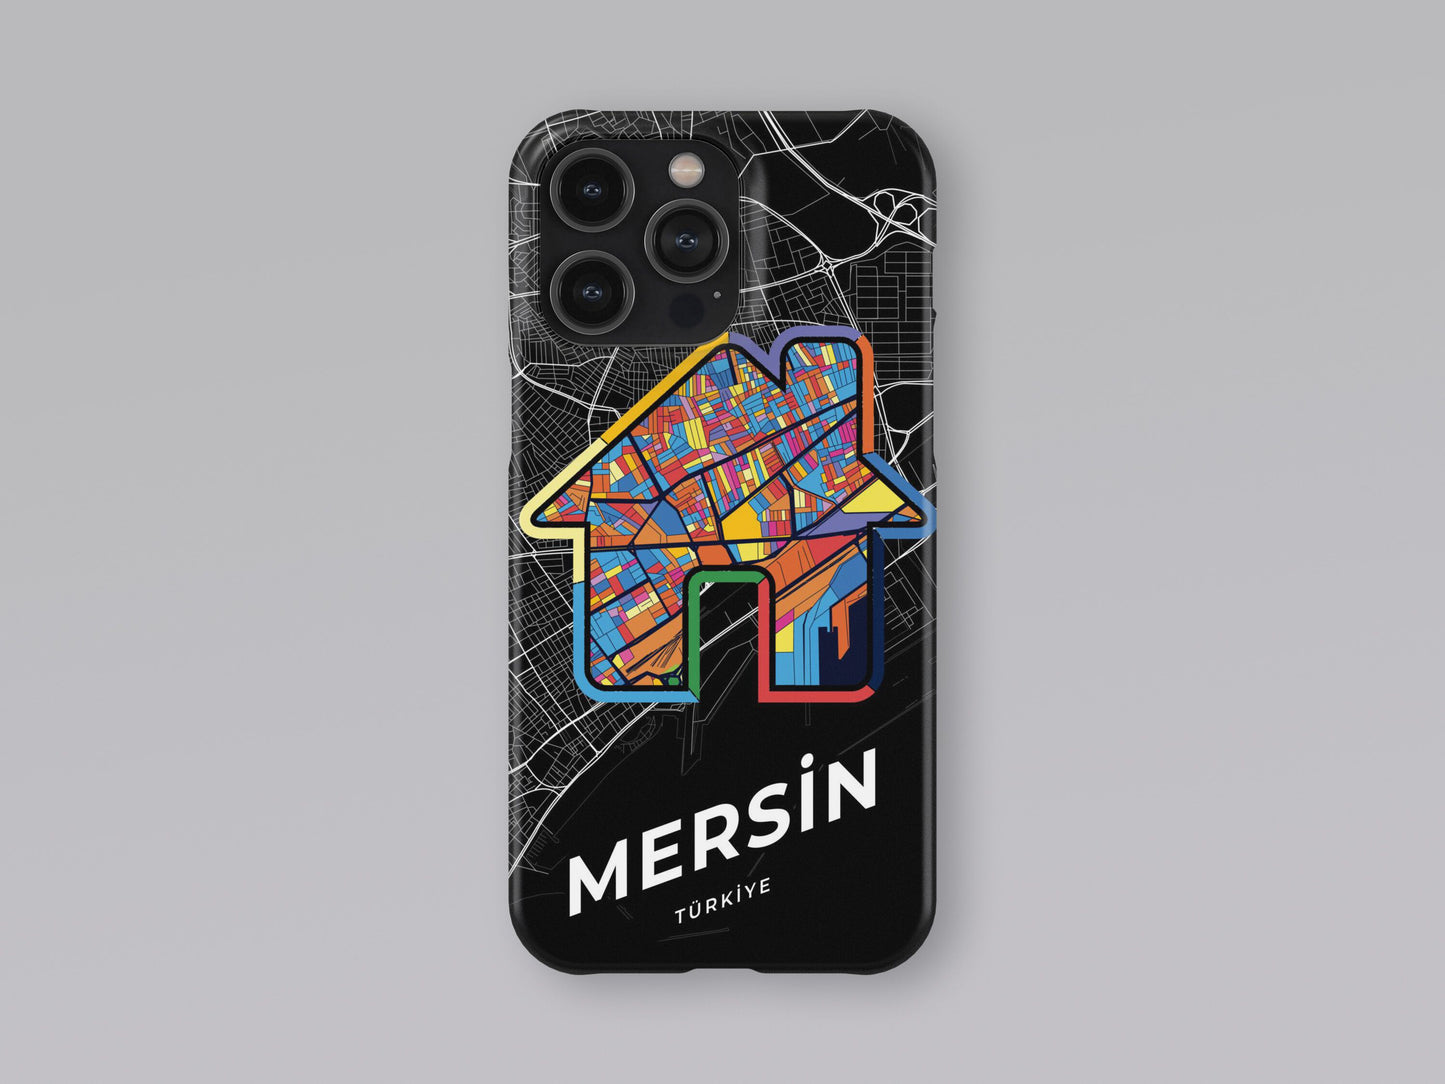 Mersin Turkey slim phone case with colorful icon 3